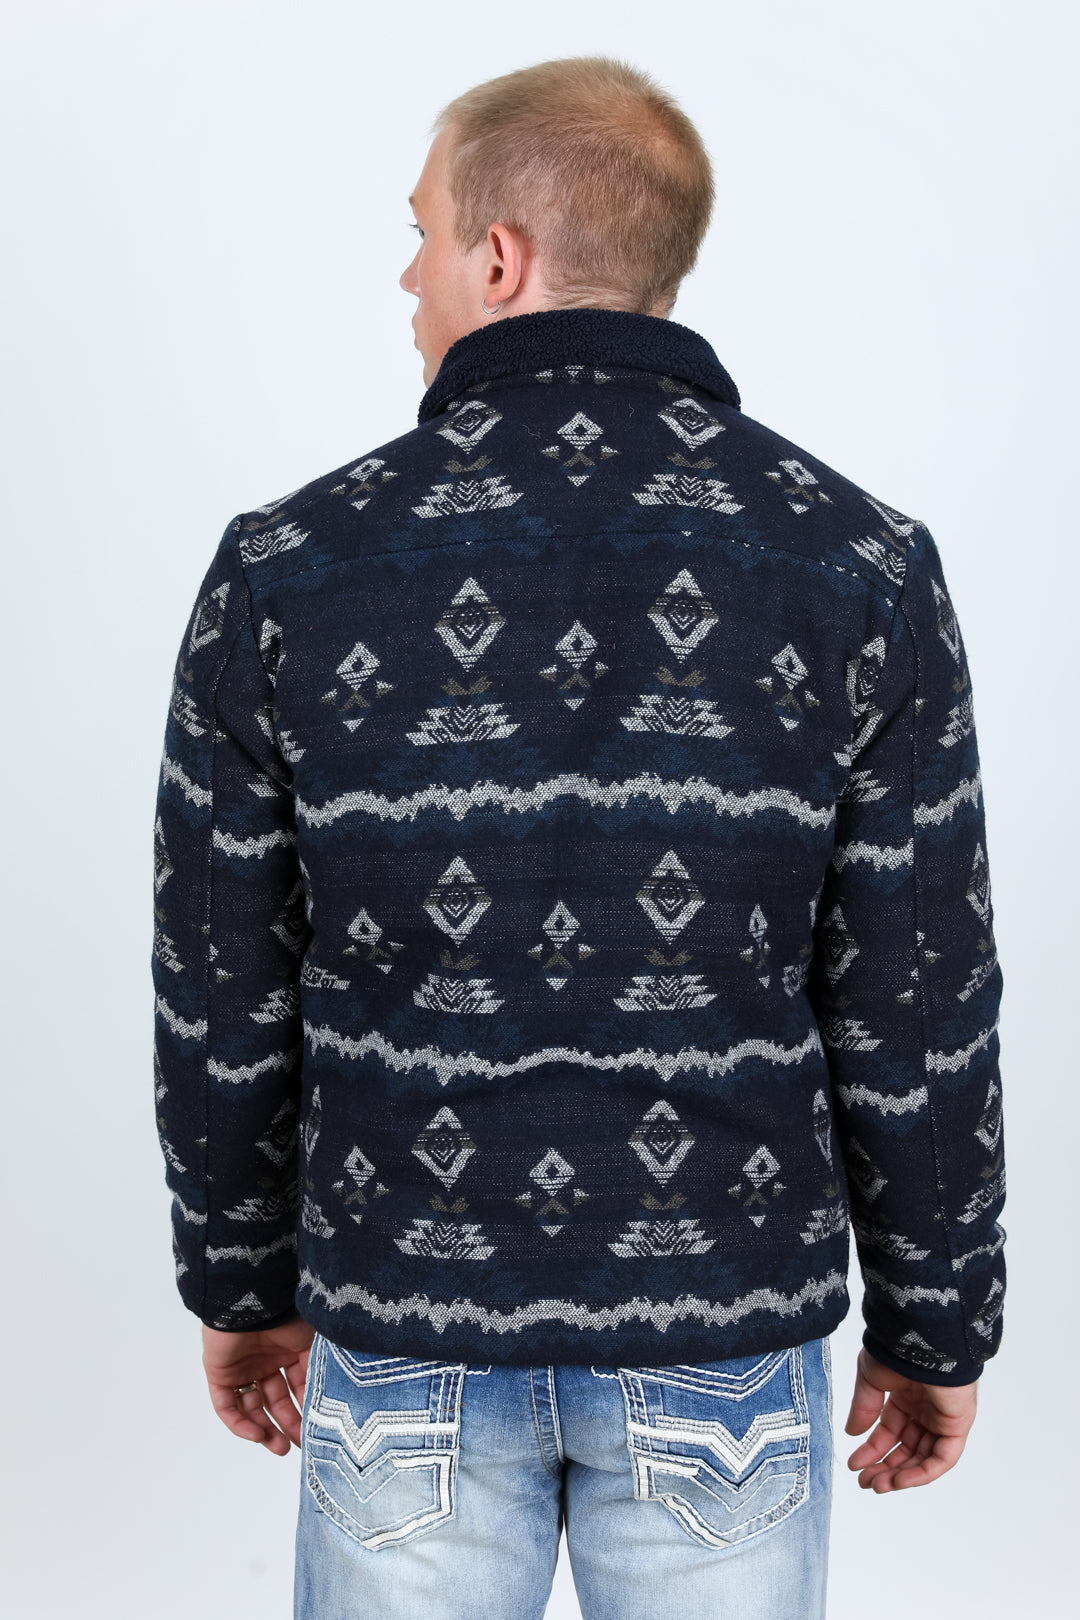 Platini Mens Ethnic Aztec Quilted Fur Lined Jacket - Navy